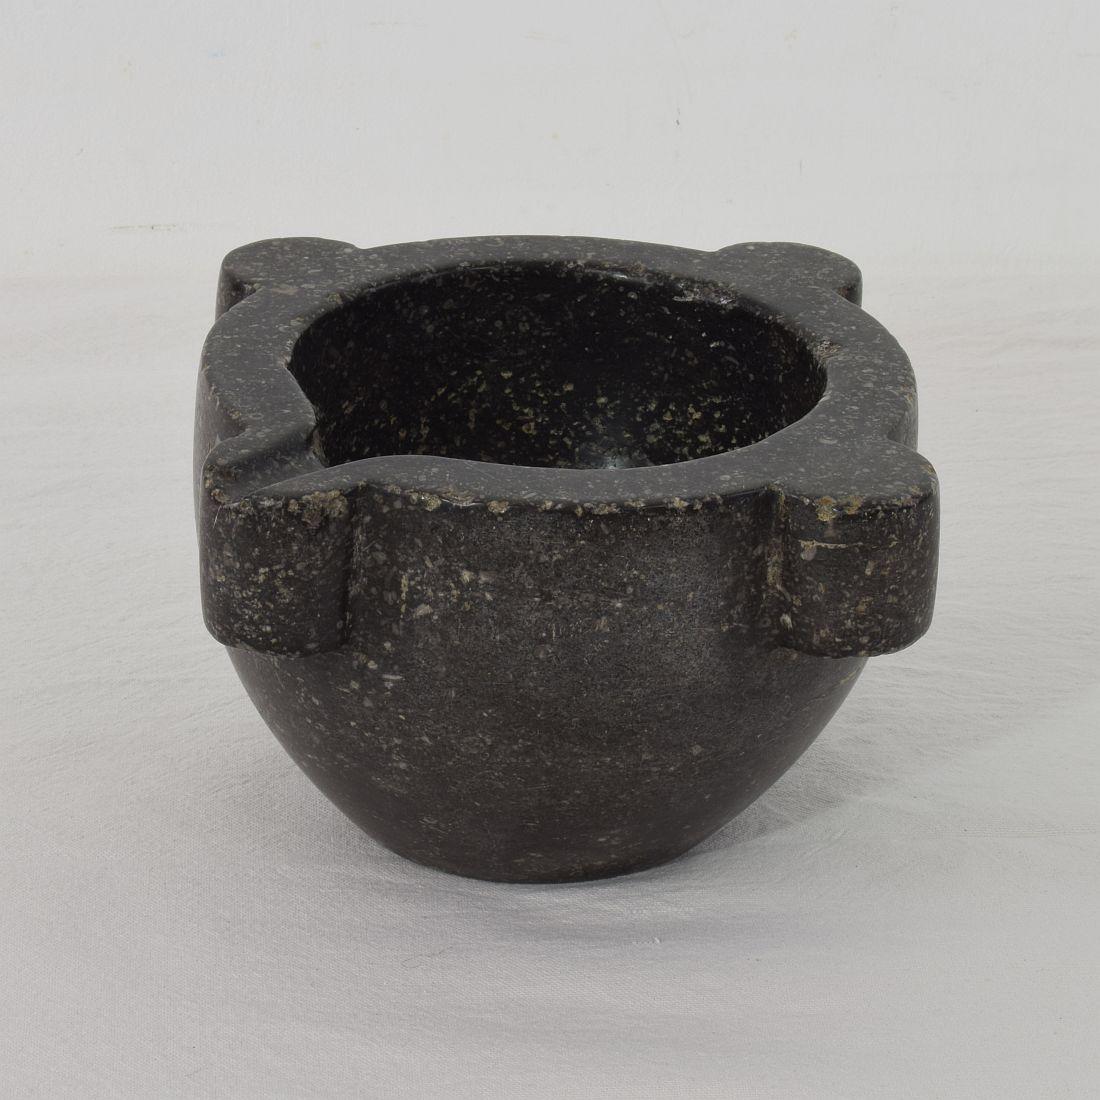 Beautiful and rare black marble (Belgium blue stone) mortar, France, circa 1750-1850. Great eyecatcher.
Weathered but good condition.